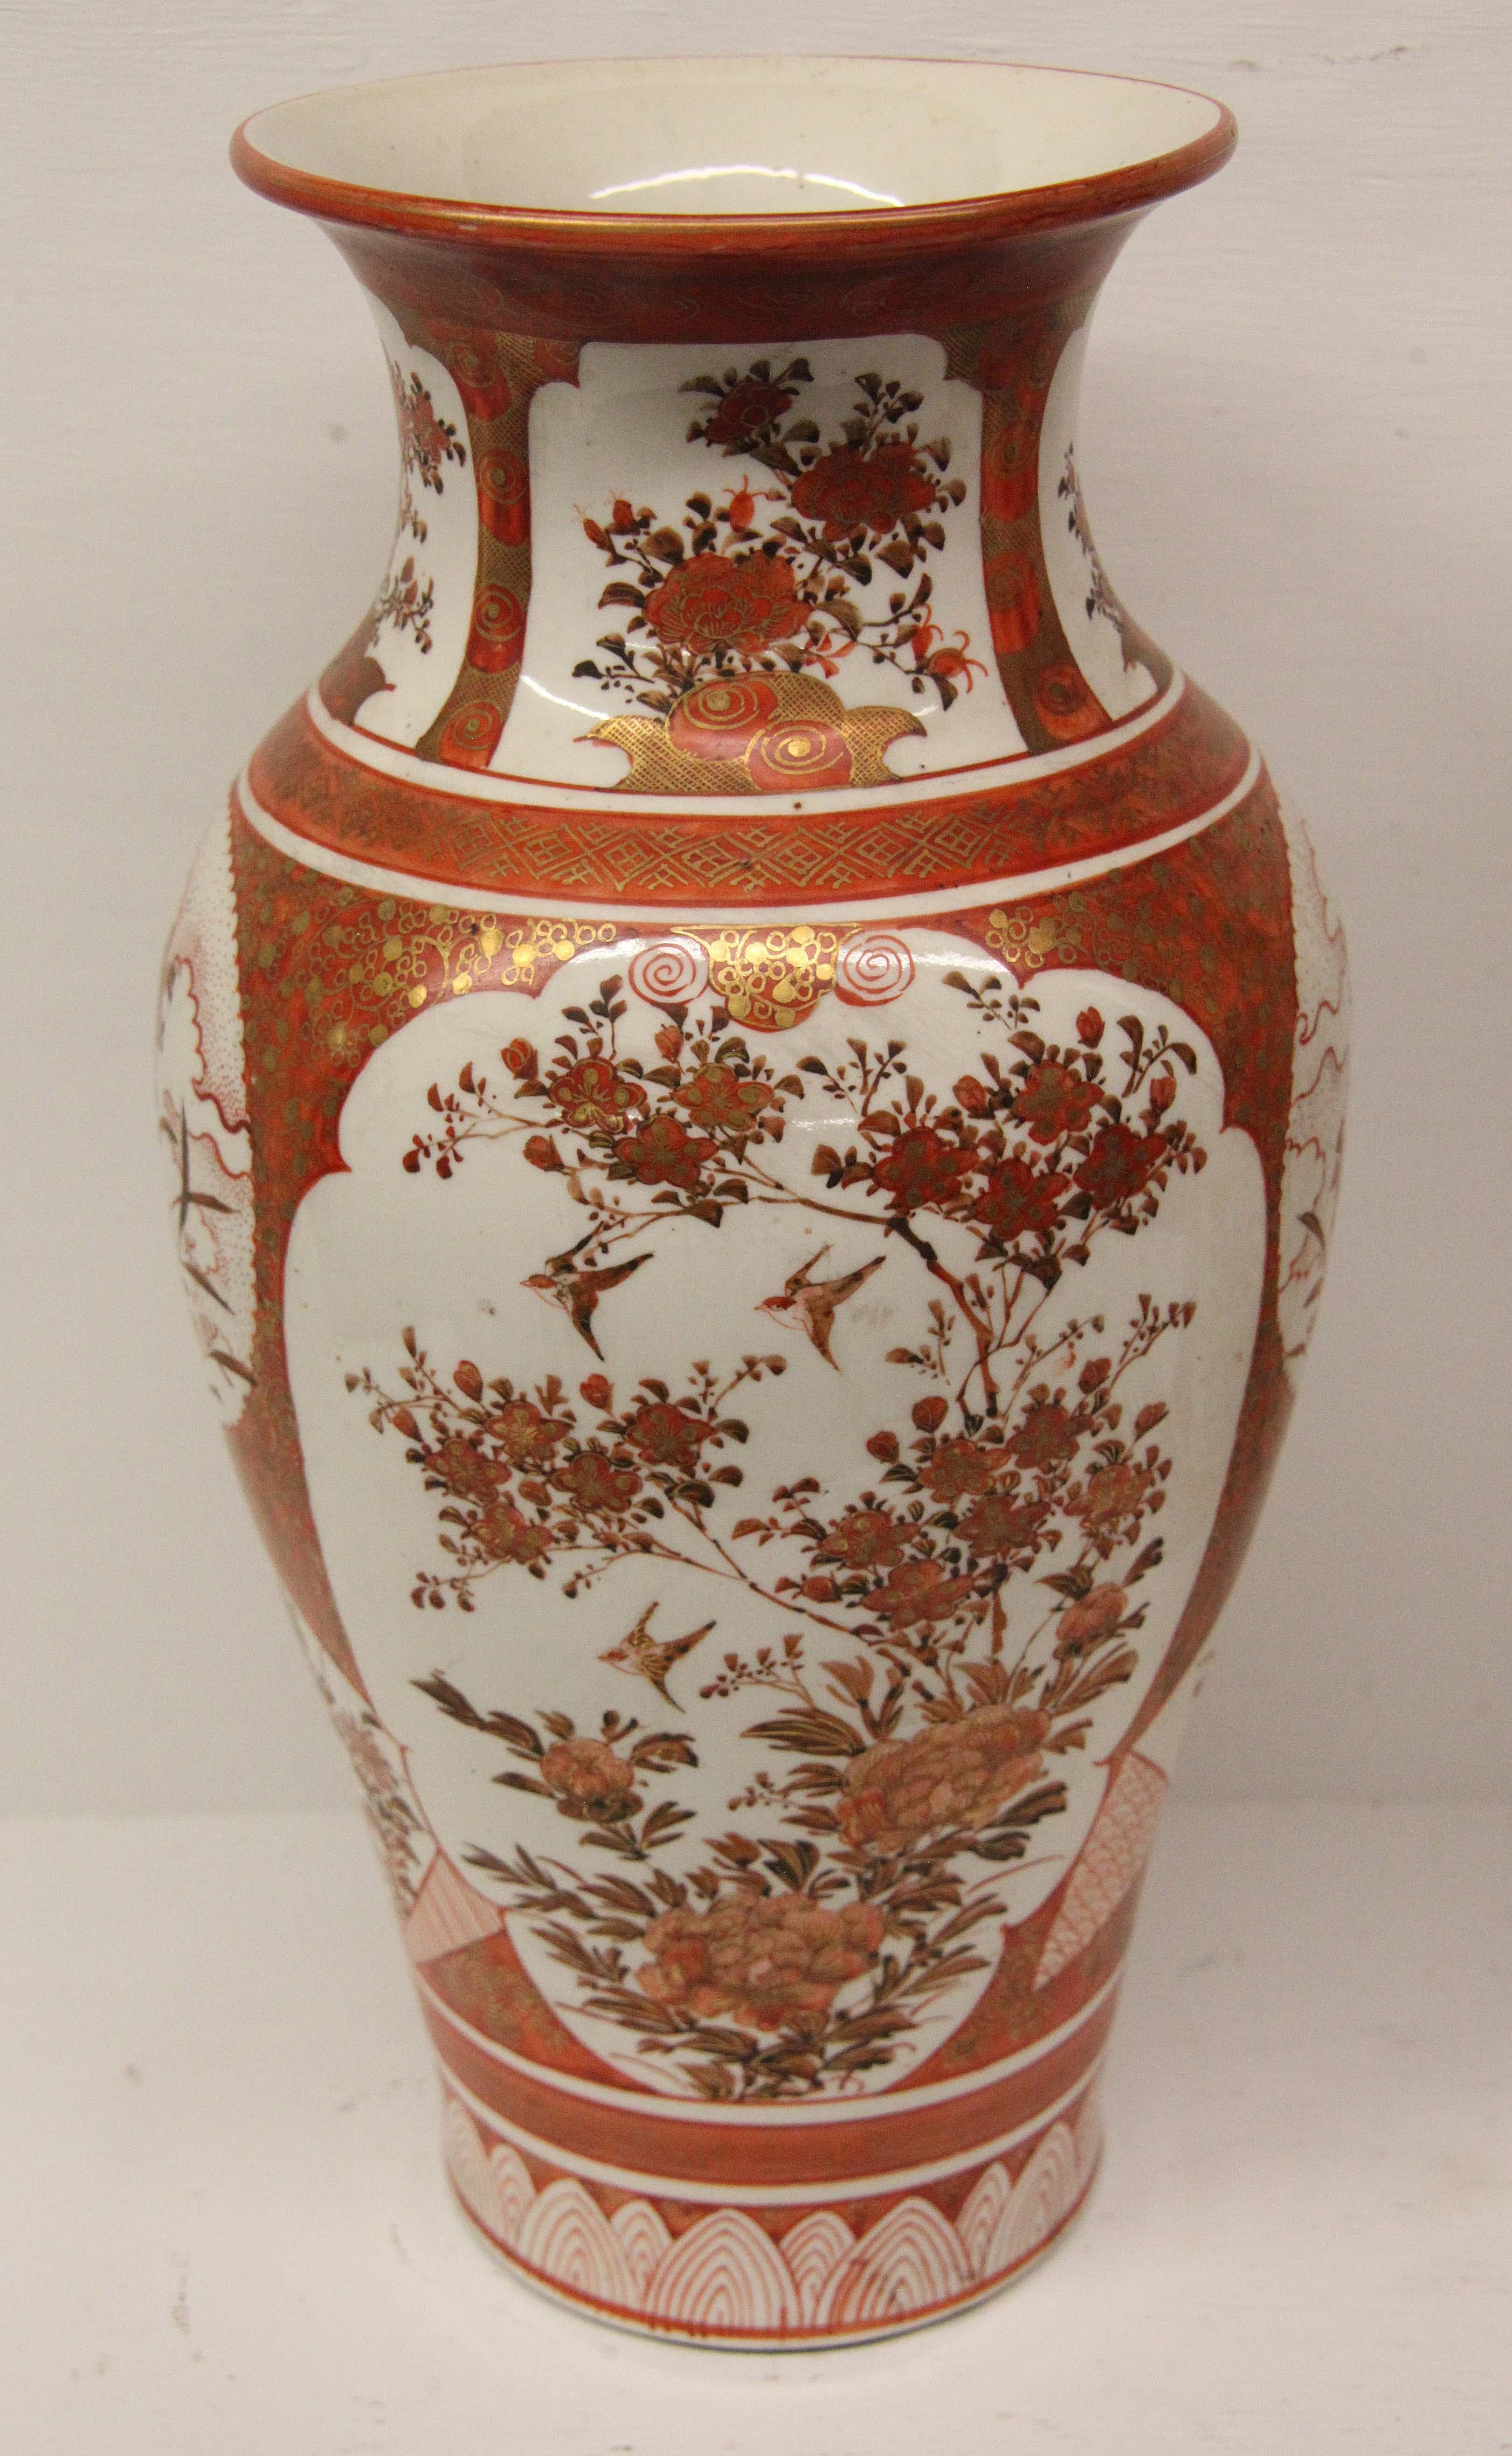 Pair of Japanese Kutani vases, the baluster form with multiple panels featuring flowers and birds.